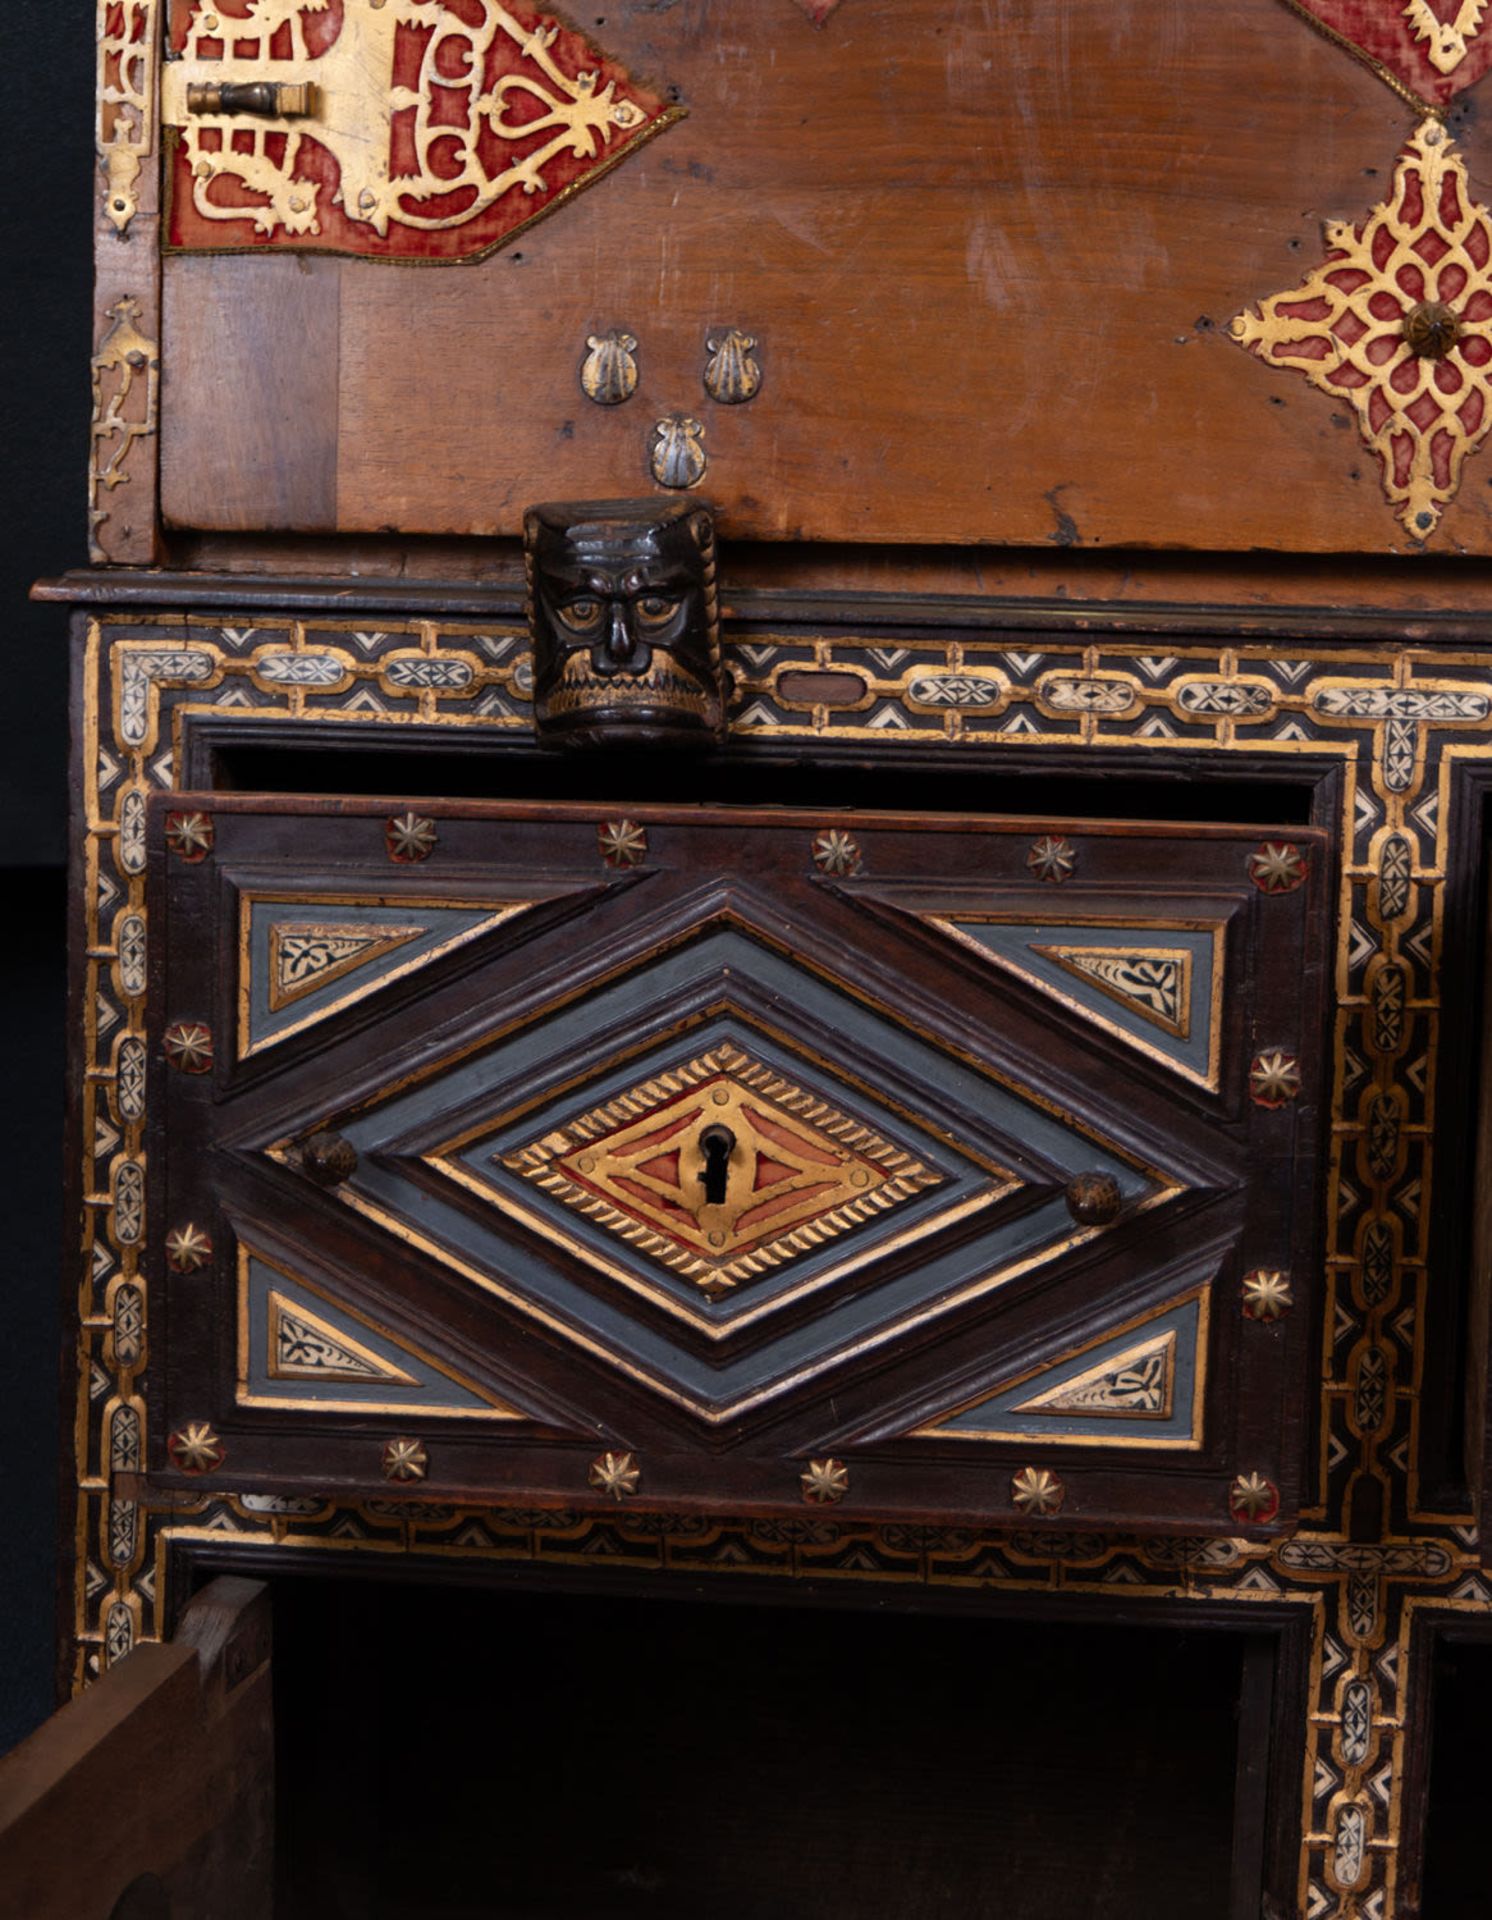 Exceptional Spanish Vargueno Cabinet complete with table, Toledo school of the 17th century - Image 6 of 26